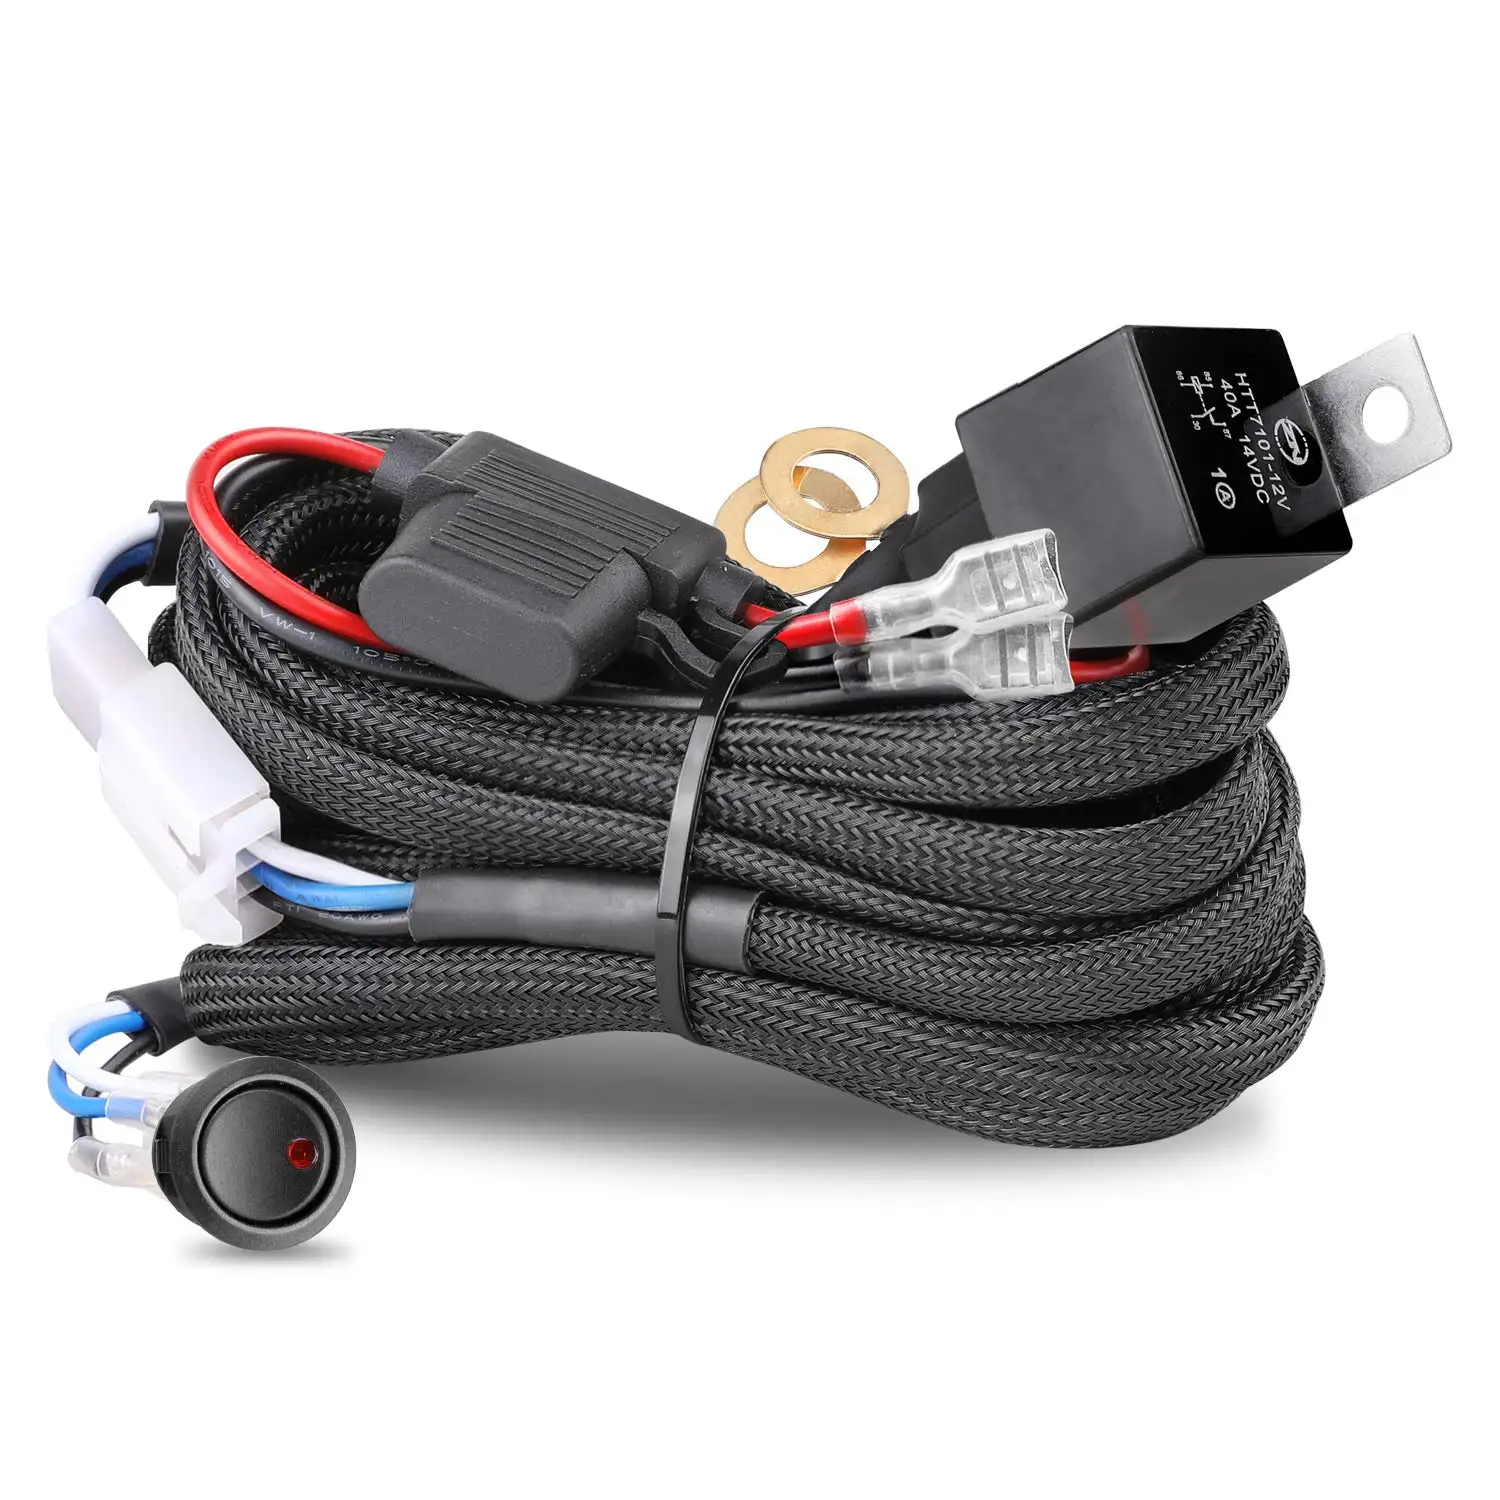 1 lead 12V 40A Rock Switch Relay Fuse Nylon Wire Harness Kit for LED Light Bars Fog Lights Work